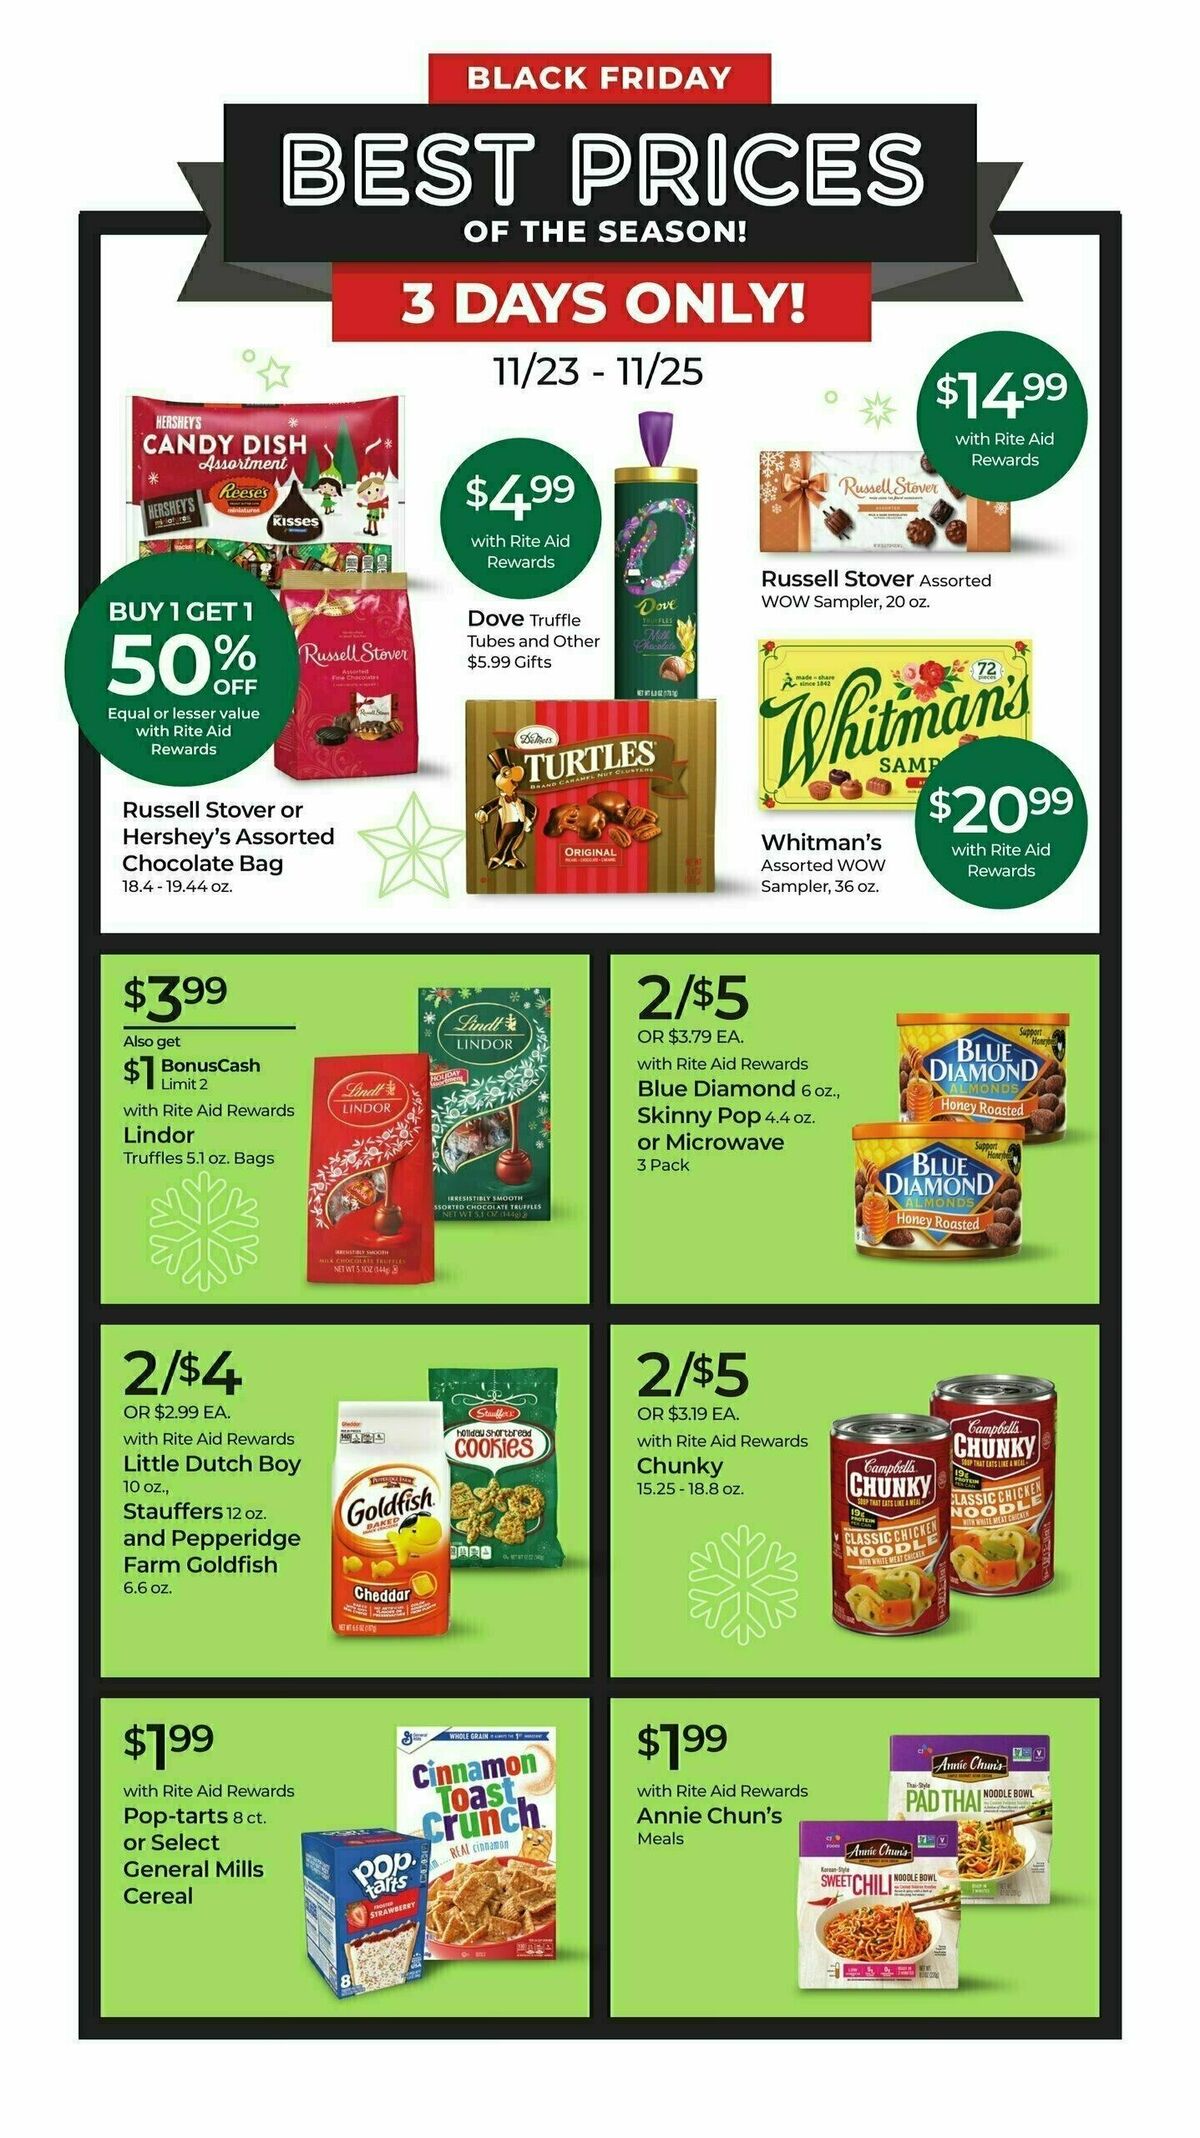 Rite Aid Weekly Ad from November 23